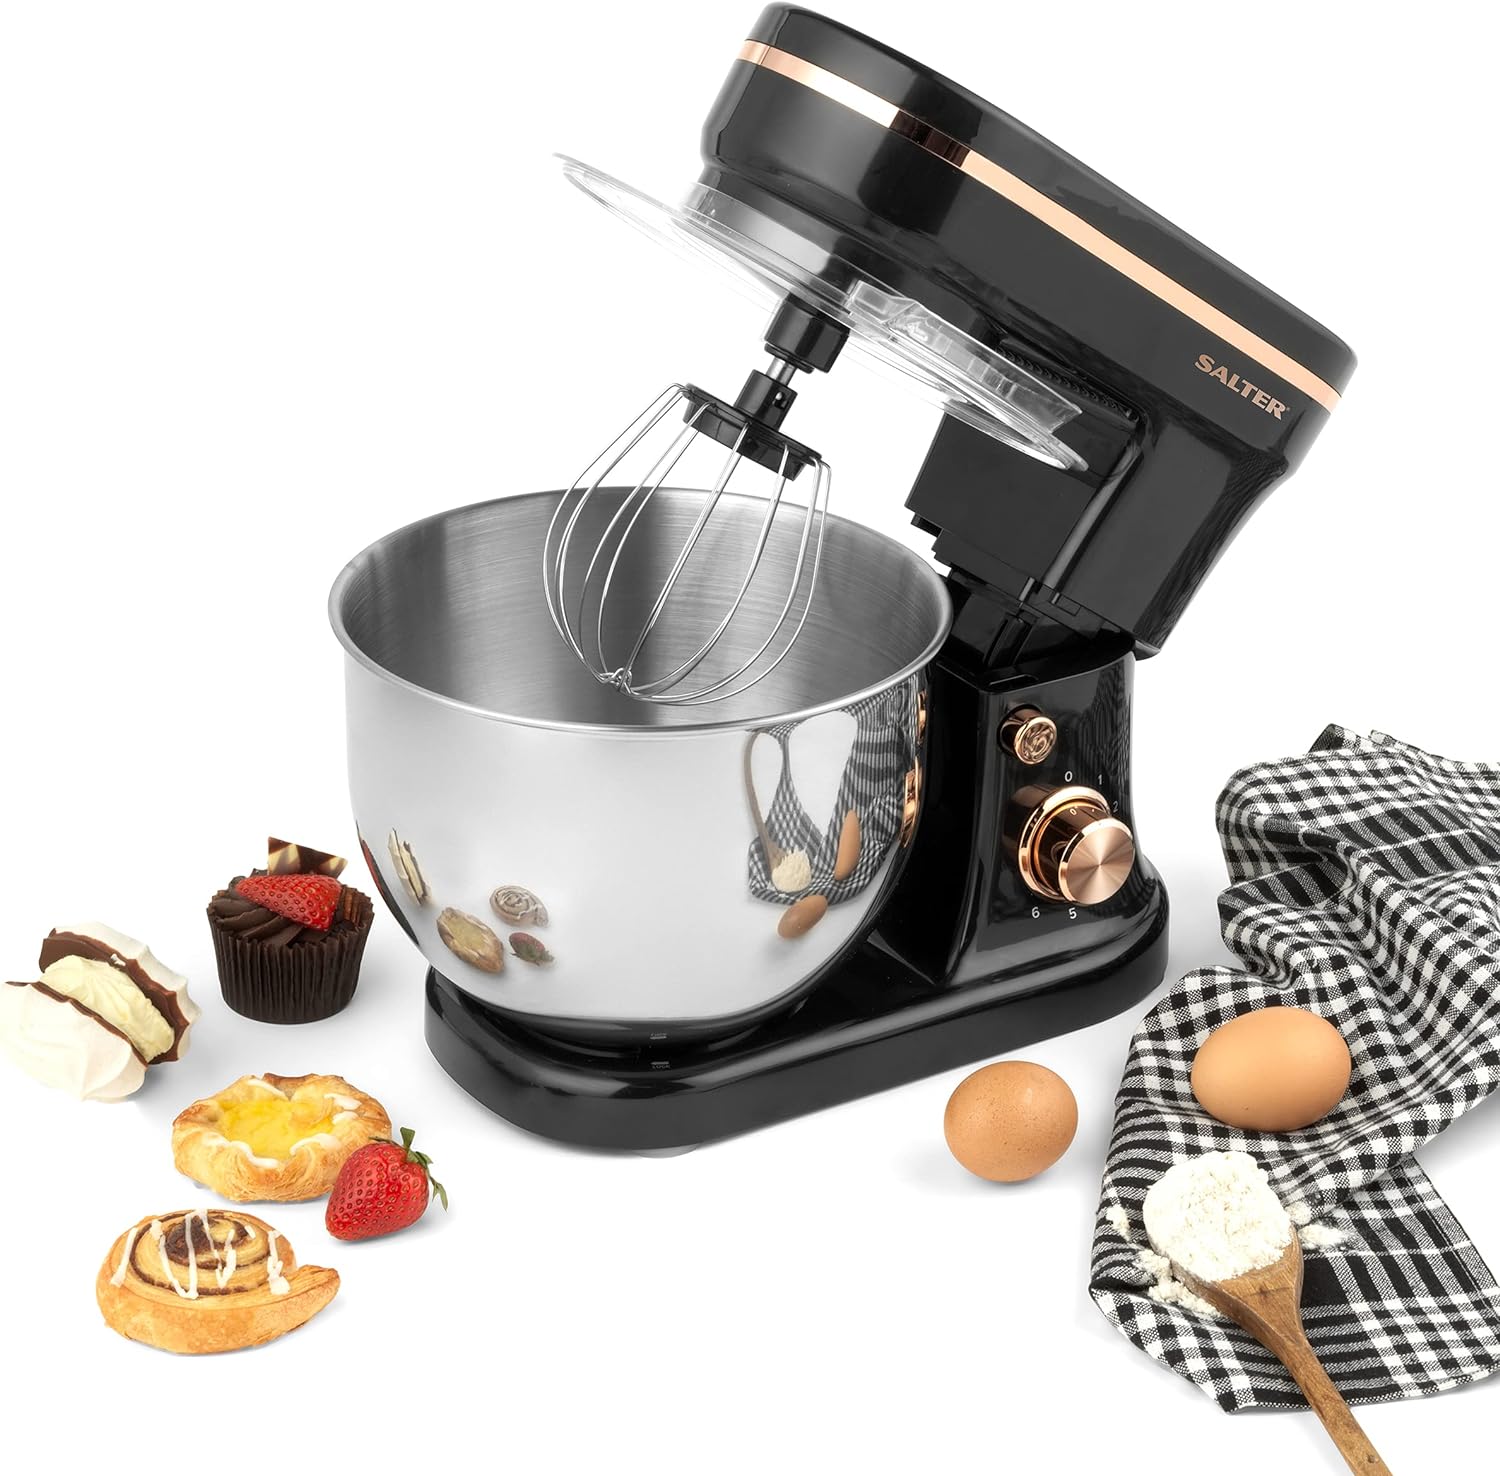 Salter COMBO - 8906 Bakes Stand Mixer & Baking Set – With Cake Tins, 8Pc Measuring Cups & Spoons, Electric Baking Whisk, 10 Speeds with Pulse Setting, 4 Litre Mixing Bowl, Non - Stick, 1300 W, Black/Gold - Amazing Gadgets Outlet